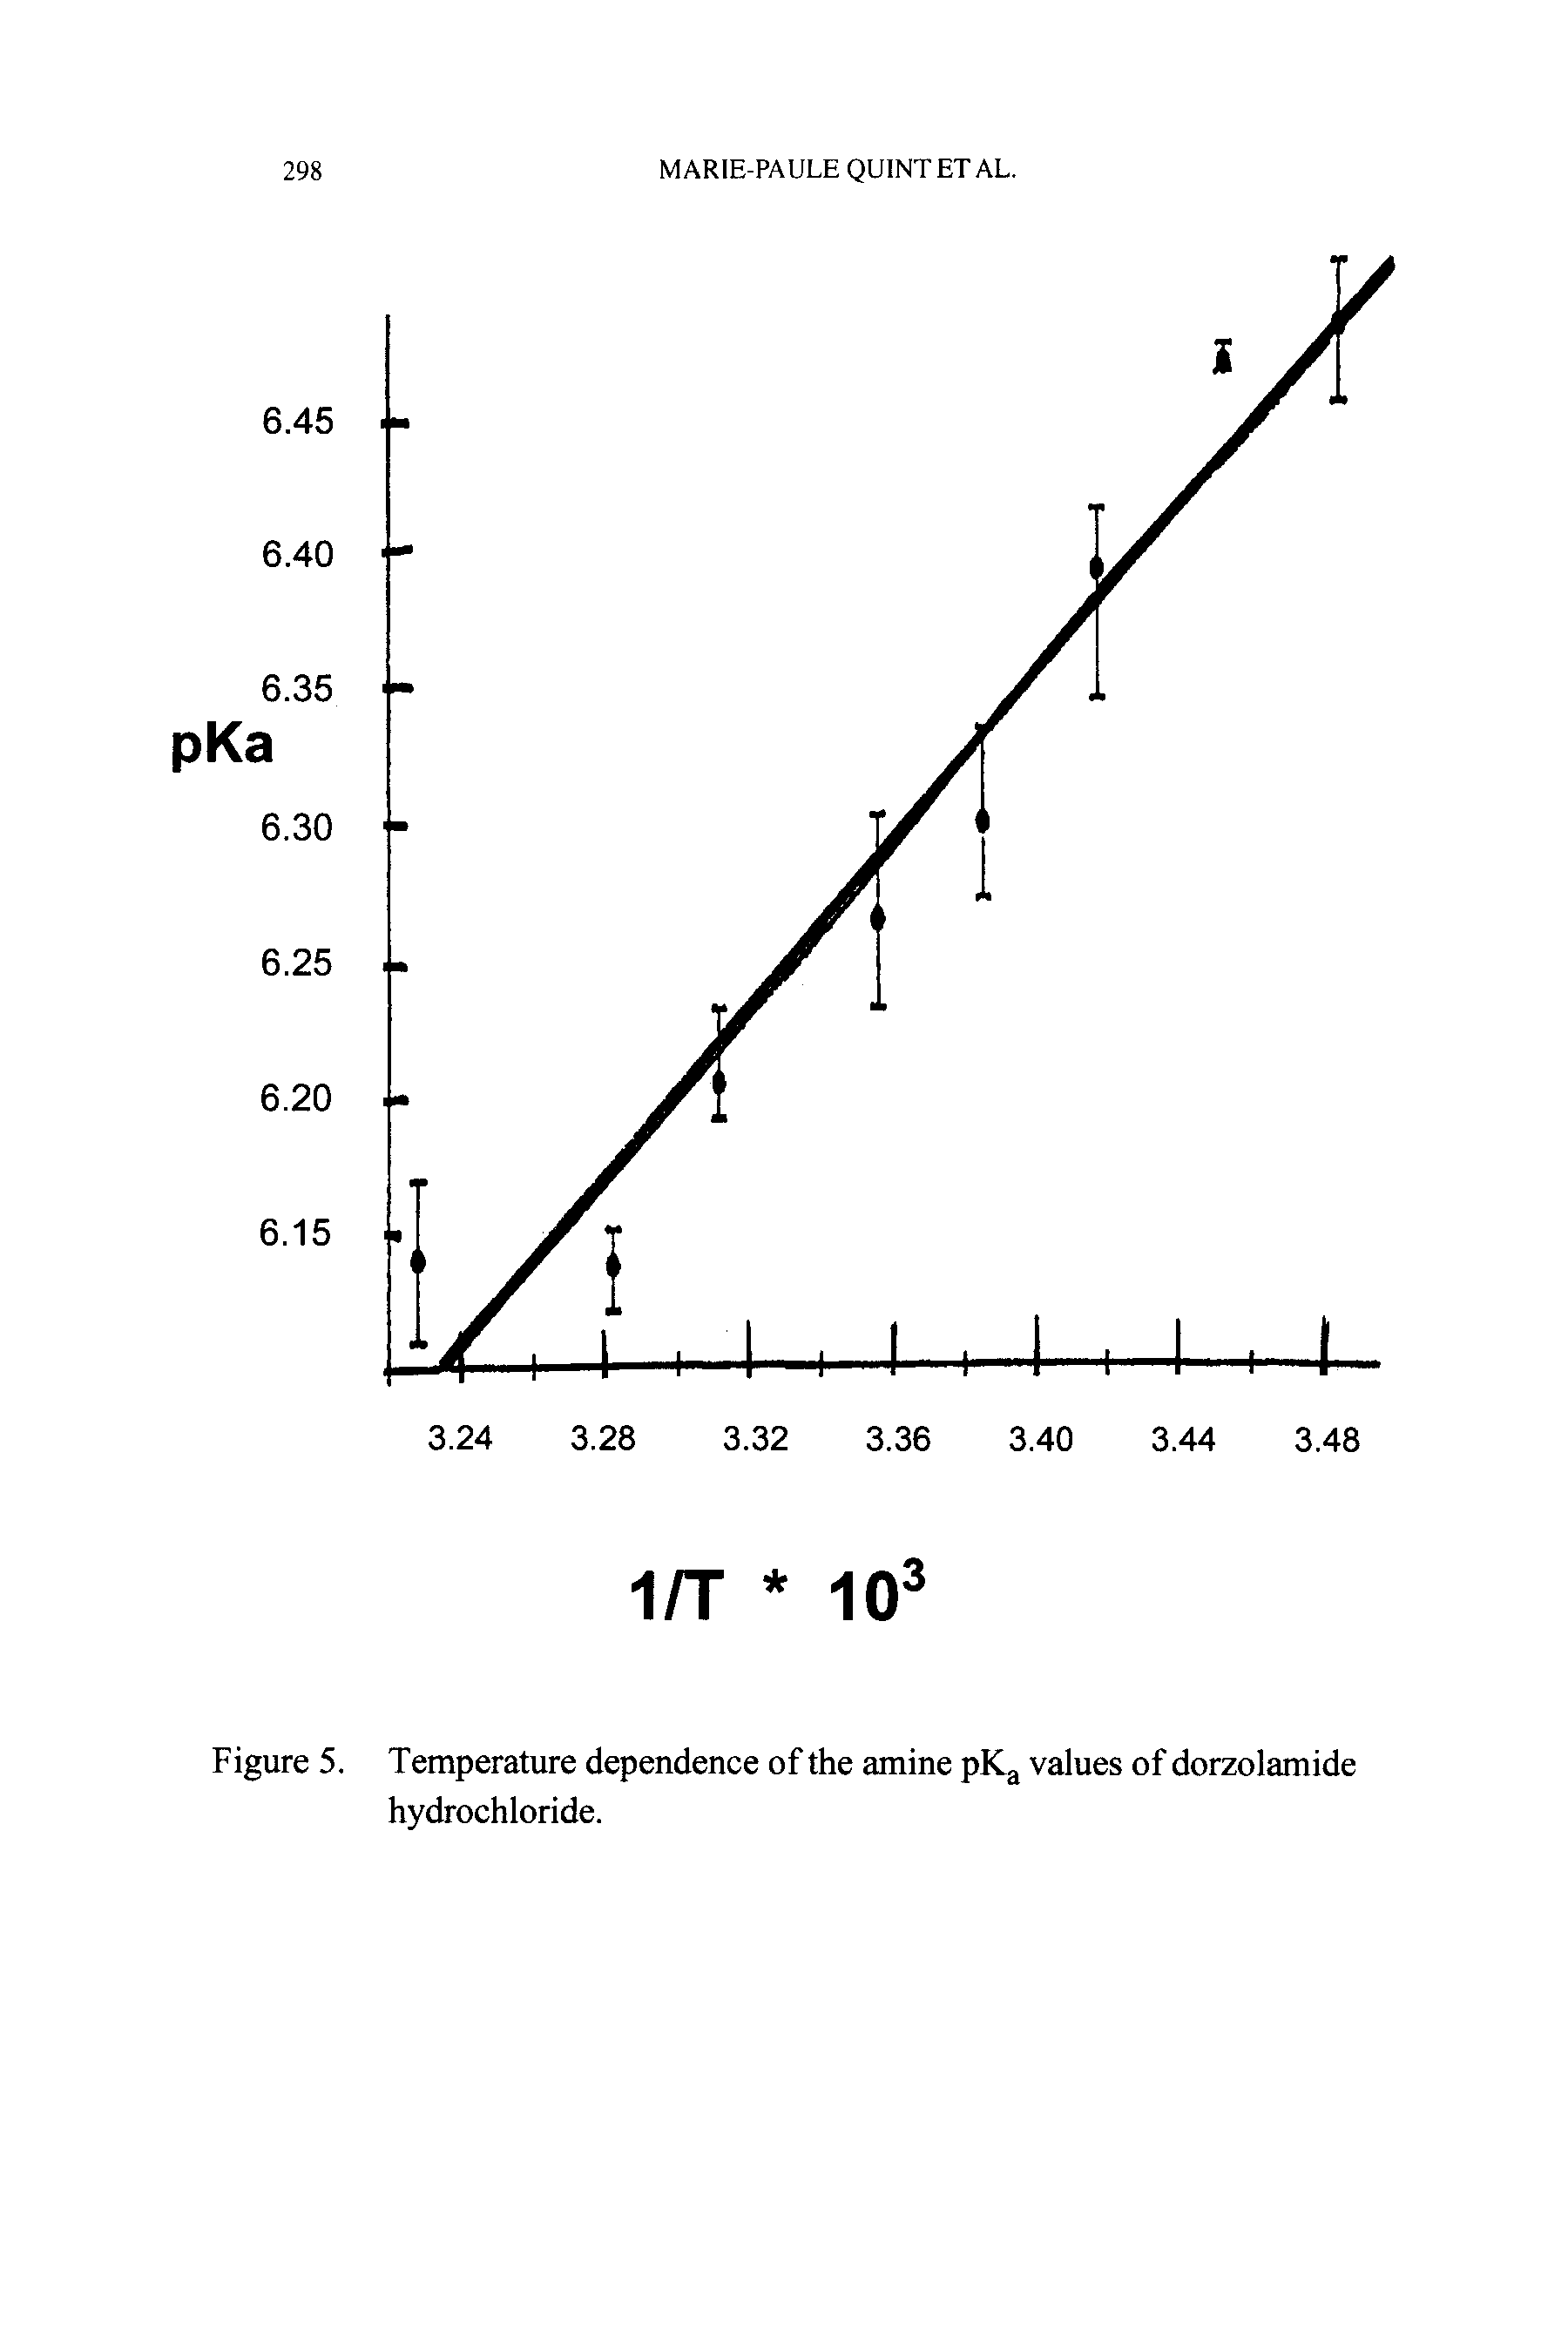 Figure 5. Temperature dependence of the amine pK values of dorzolamide hydrochloride.